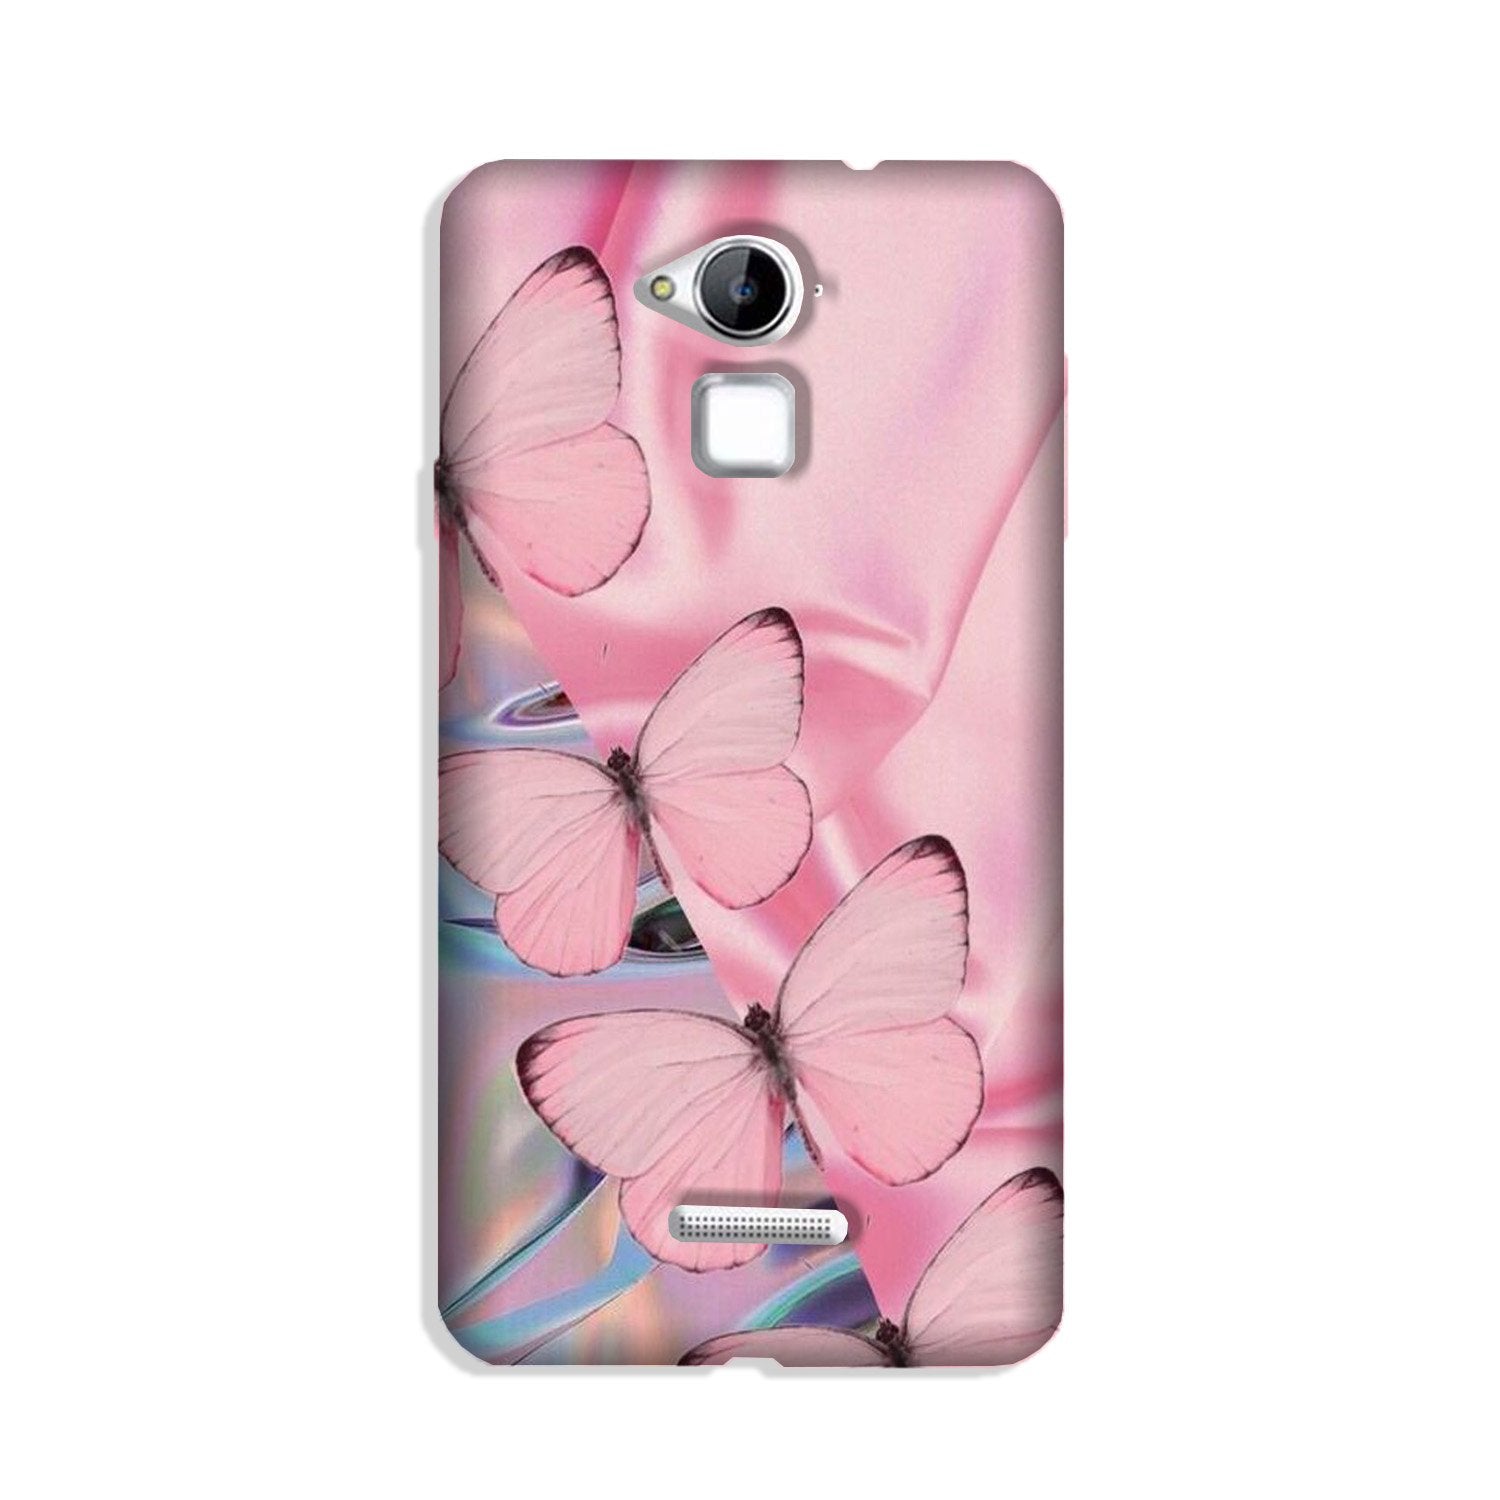 Butterflies Case for Coolpad Note 3